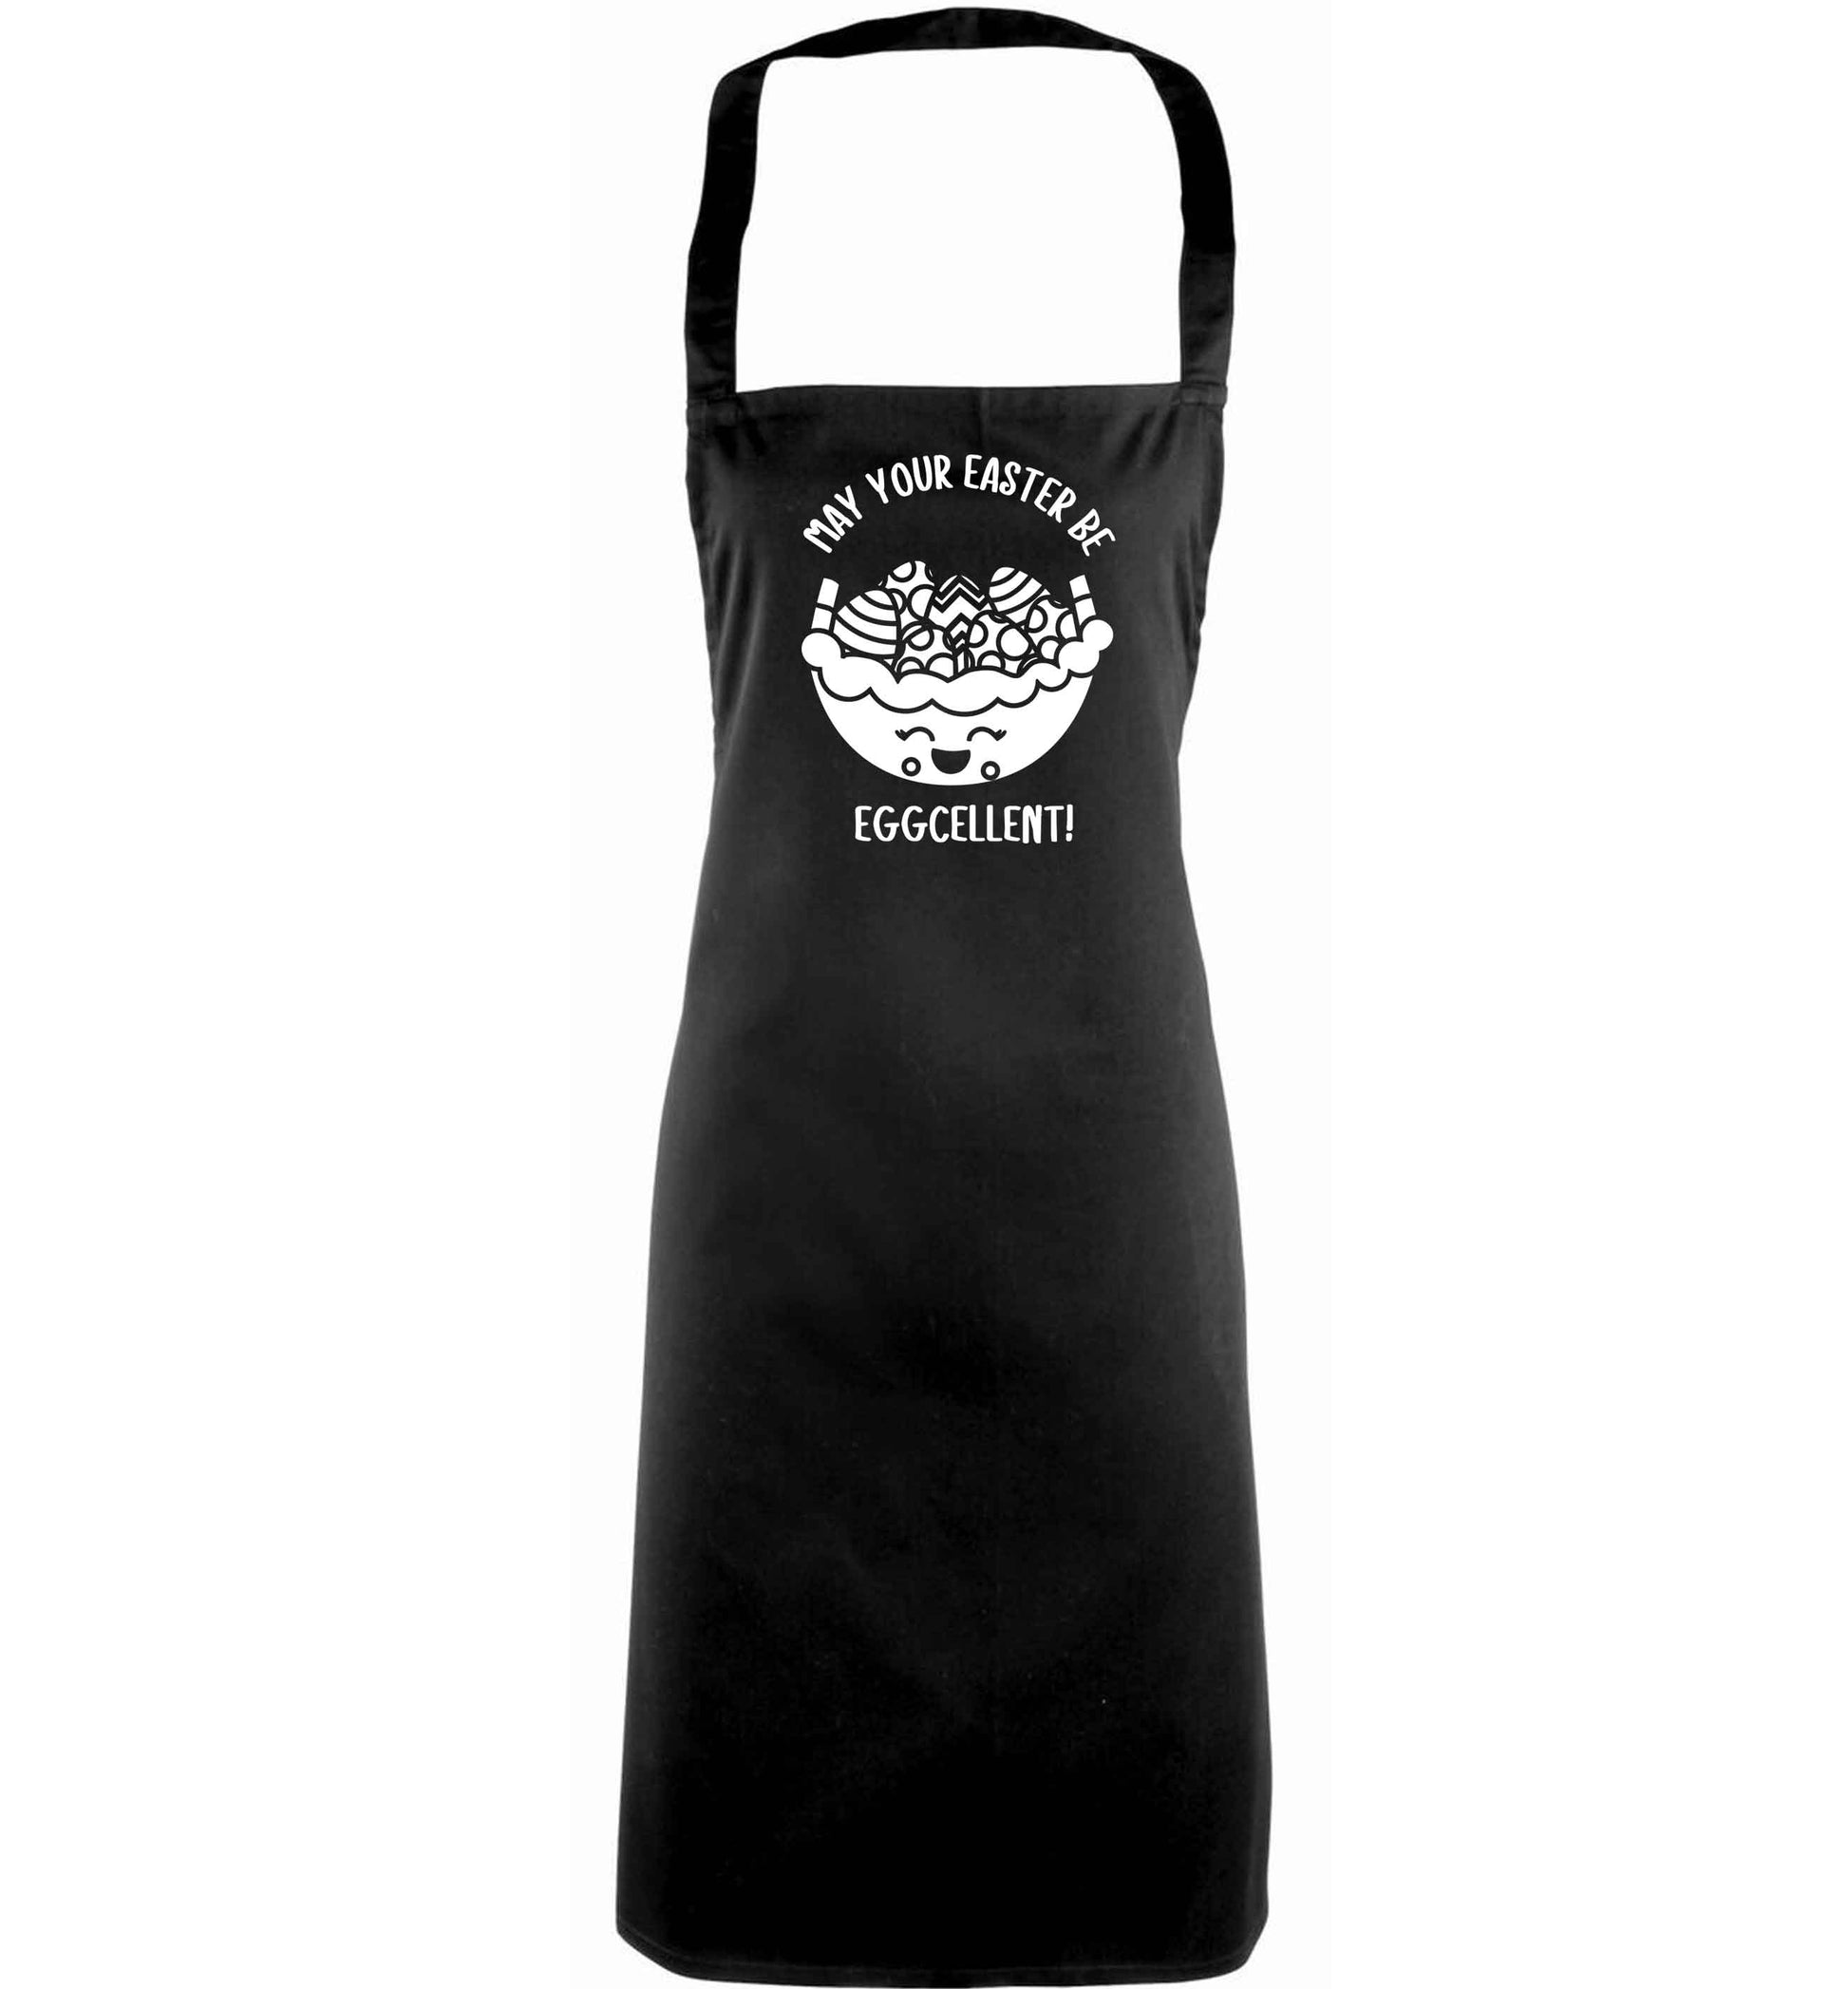 May your Easter be eggcellent adults black apron